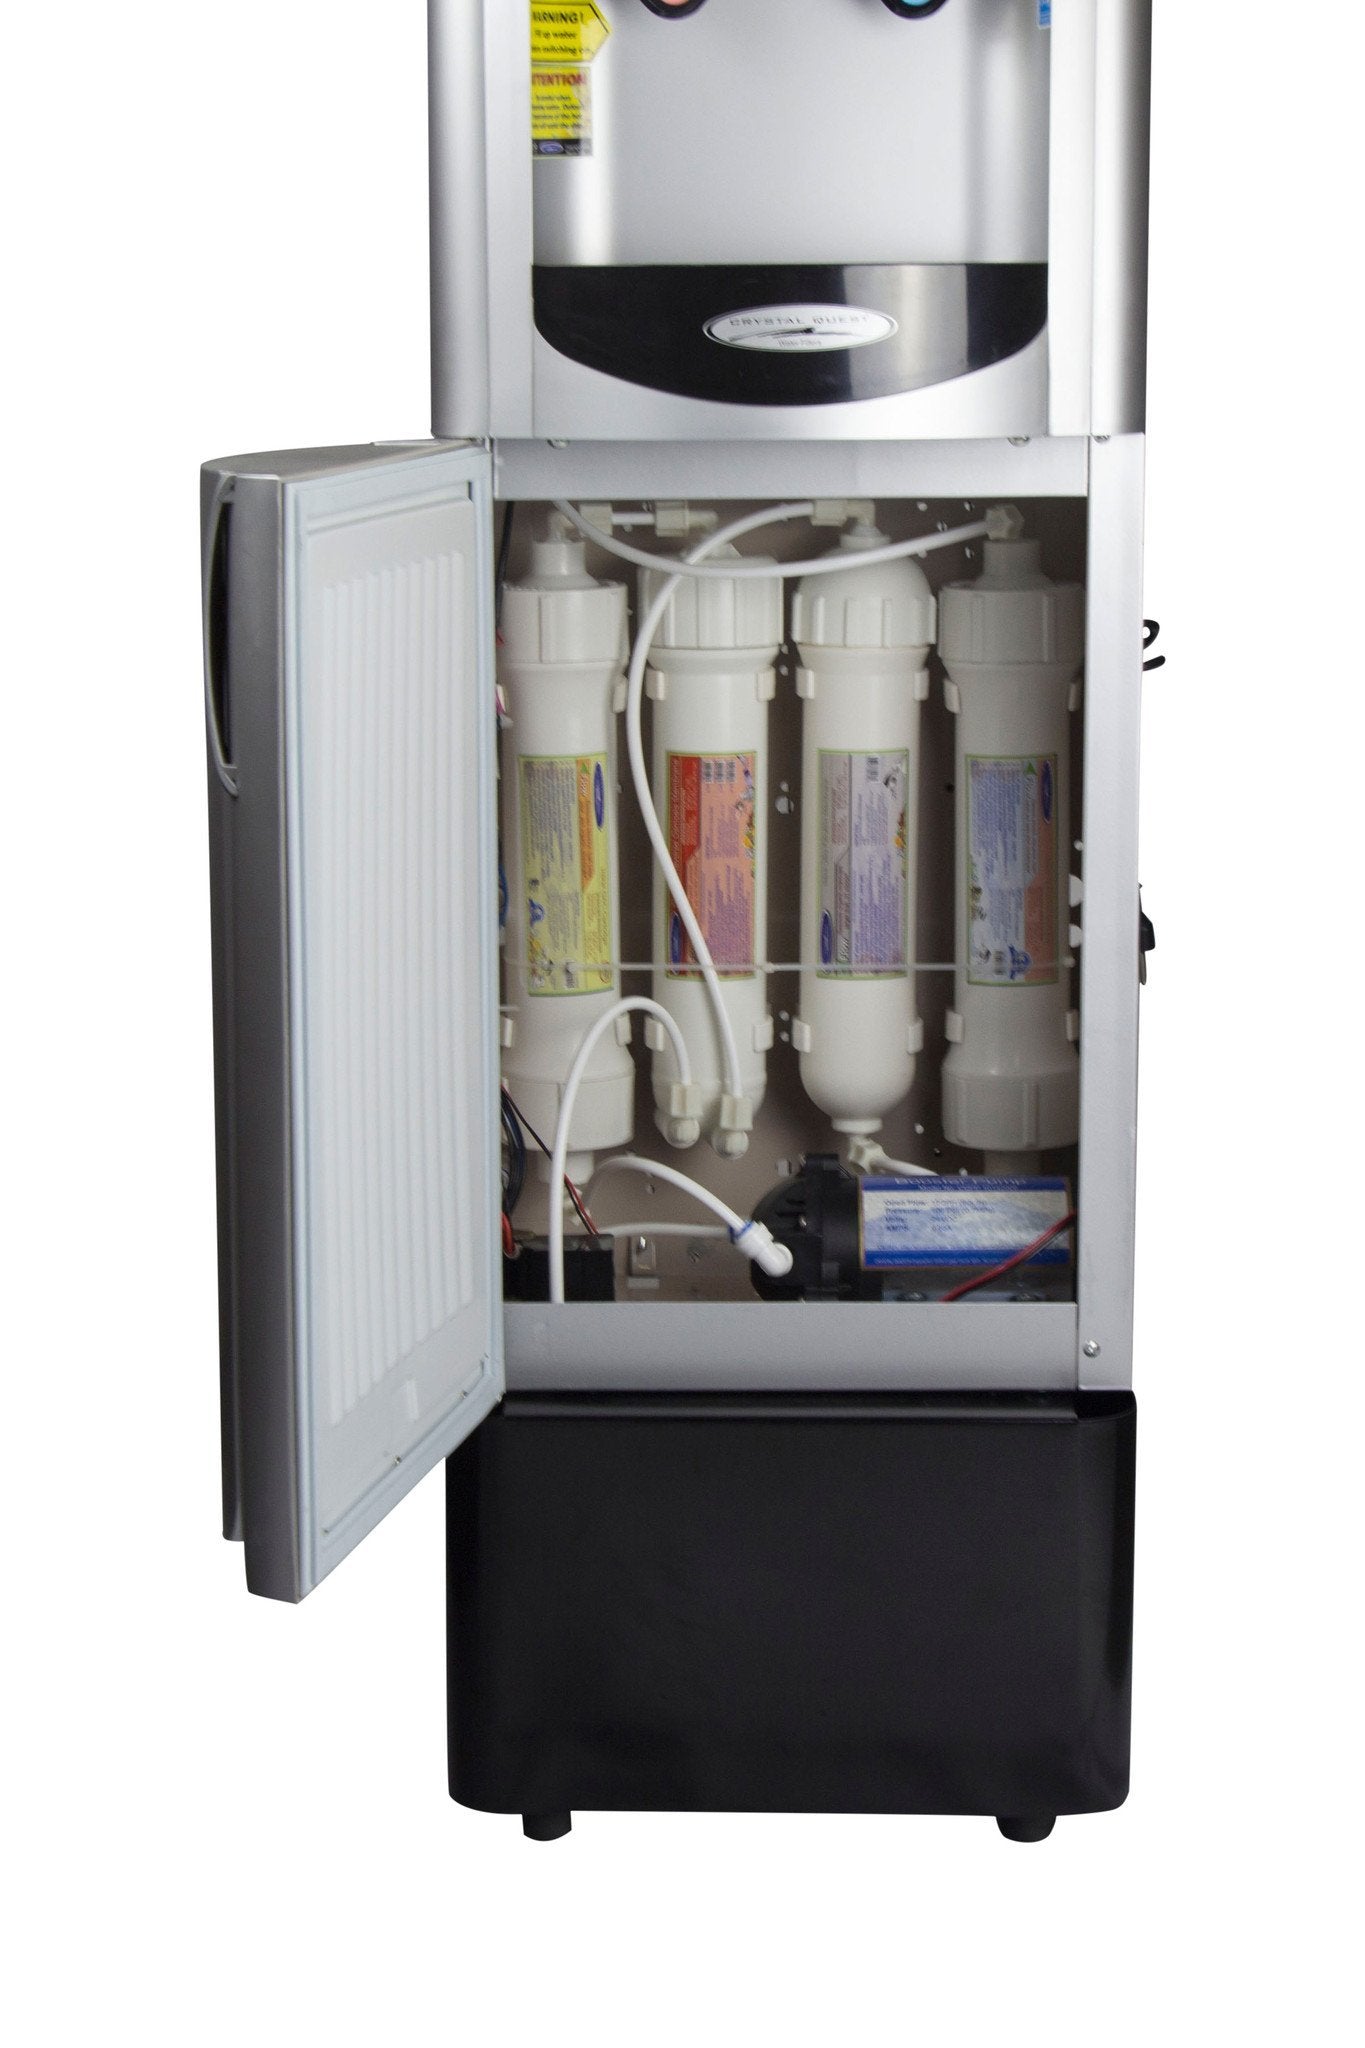 SHARP Ultrafiltration + Reverse Osmosis Bottleless Water Cooler - Bottleless Water Coolers - Crystal Quest Water Filters